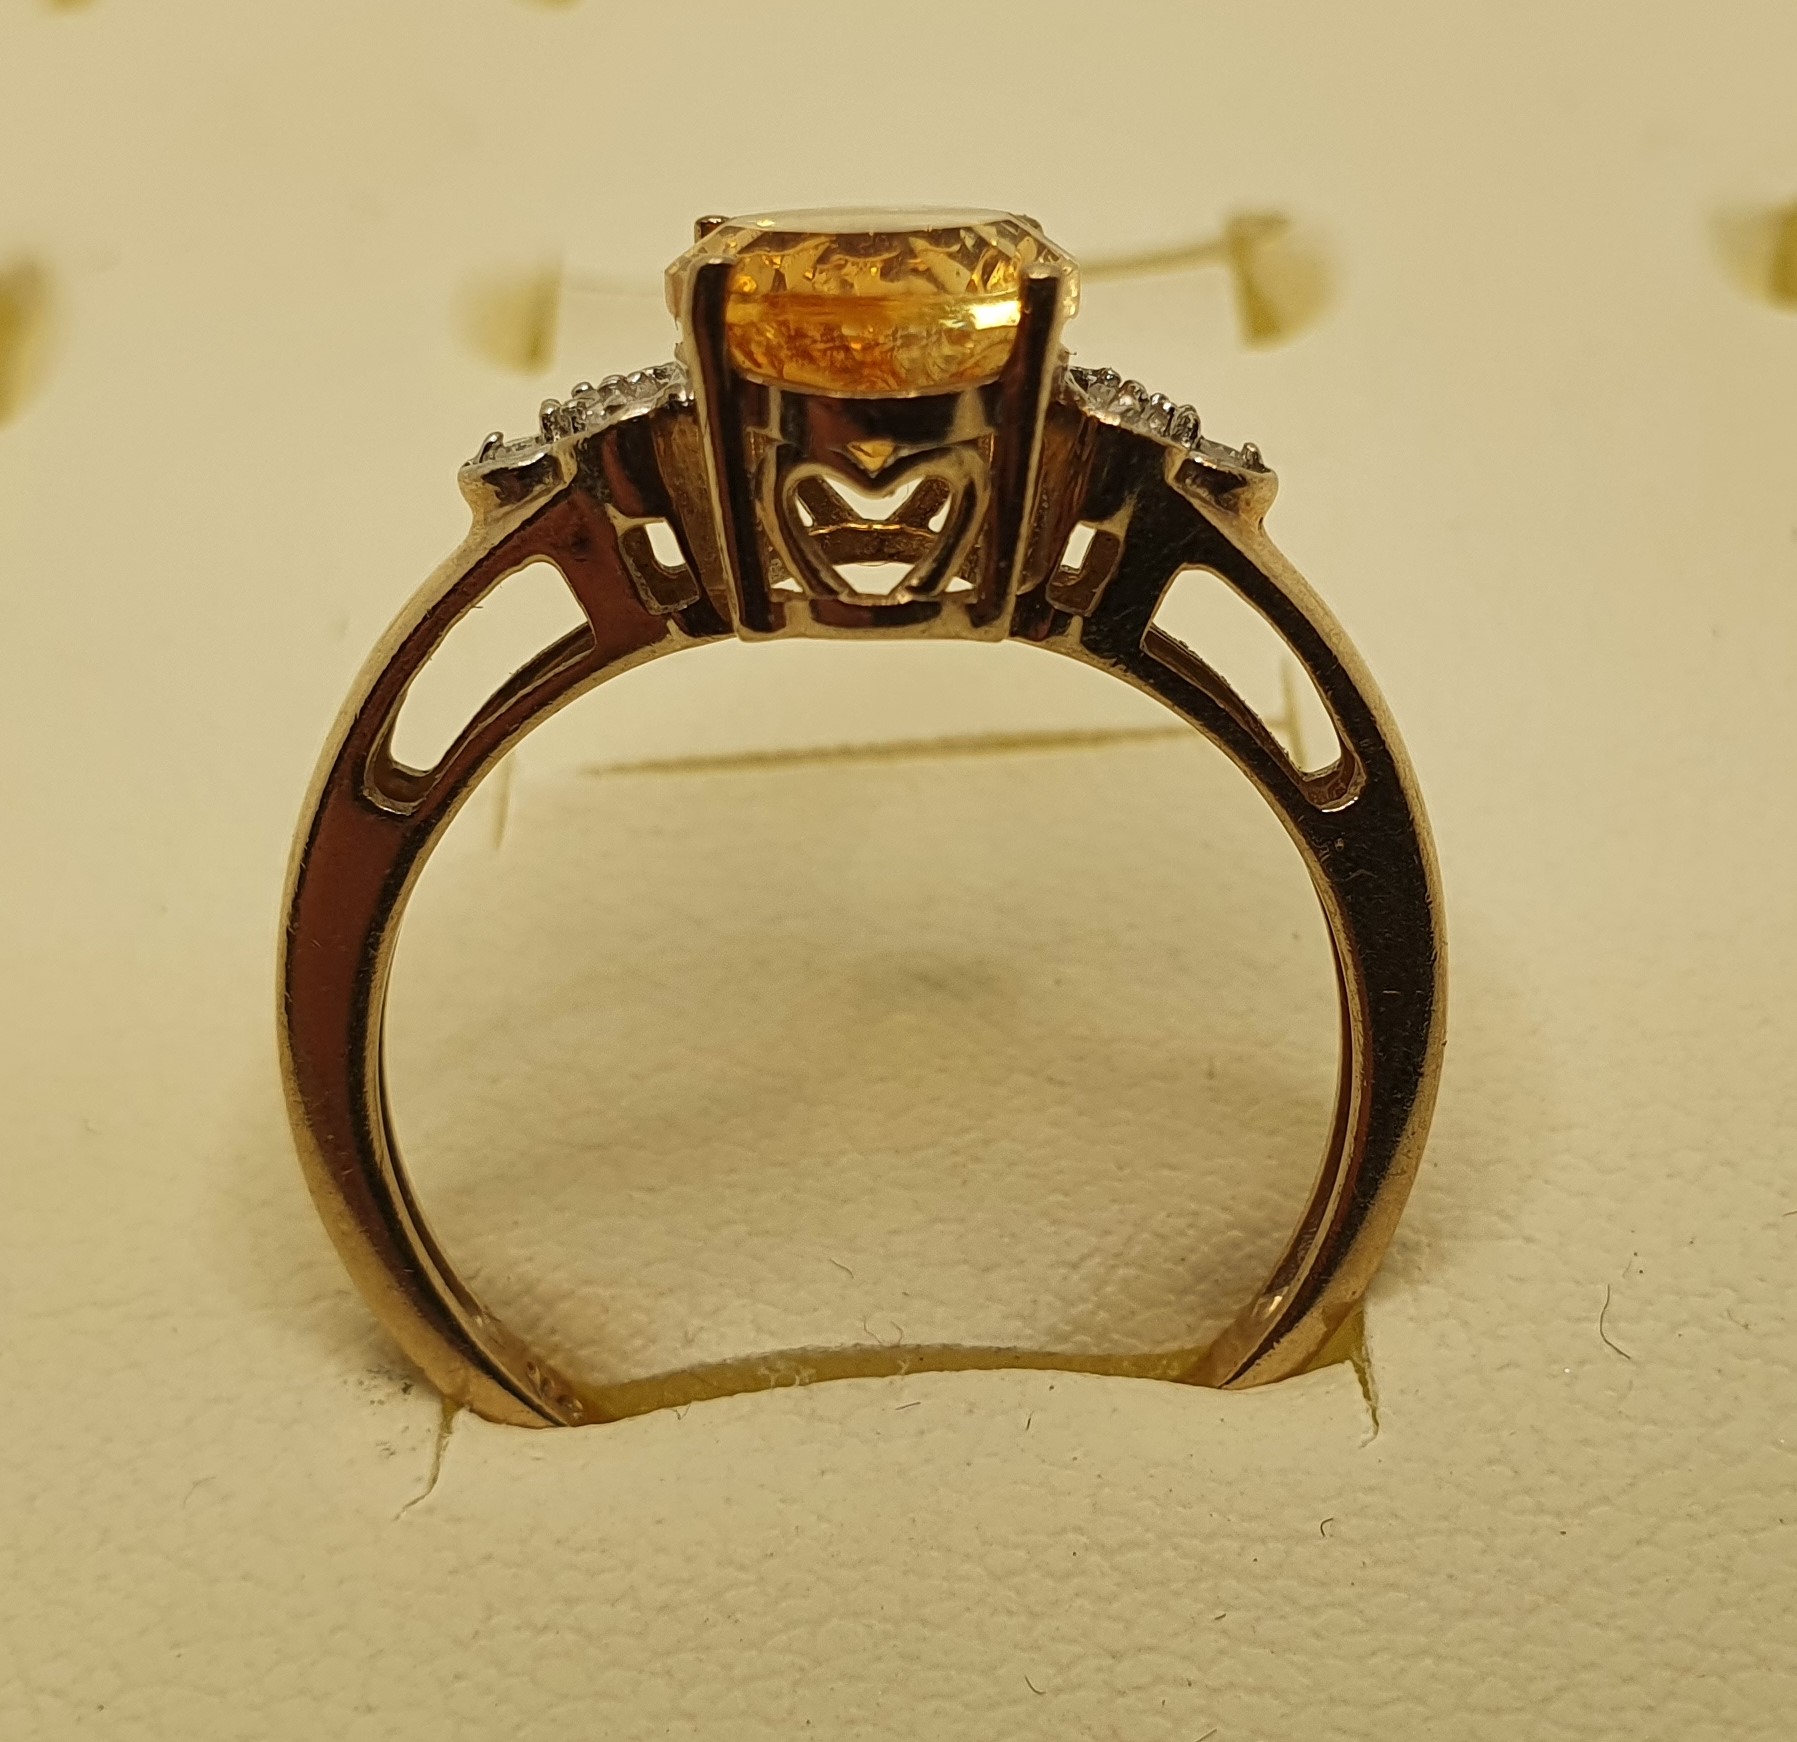 A 9ct gold citrine (chipped) and diamond ring, 2.5 gms, size O1/2. - Image 2 of 3